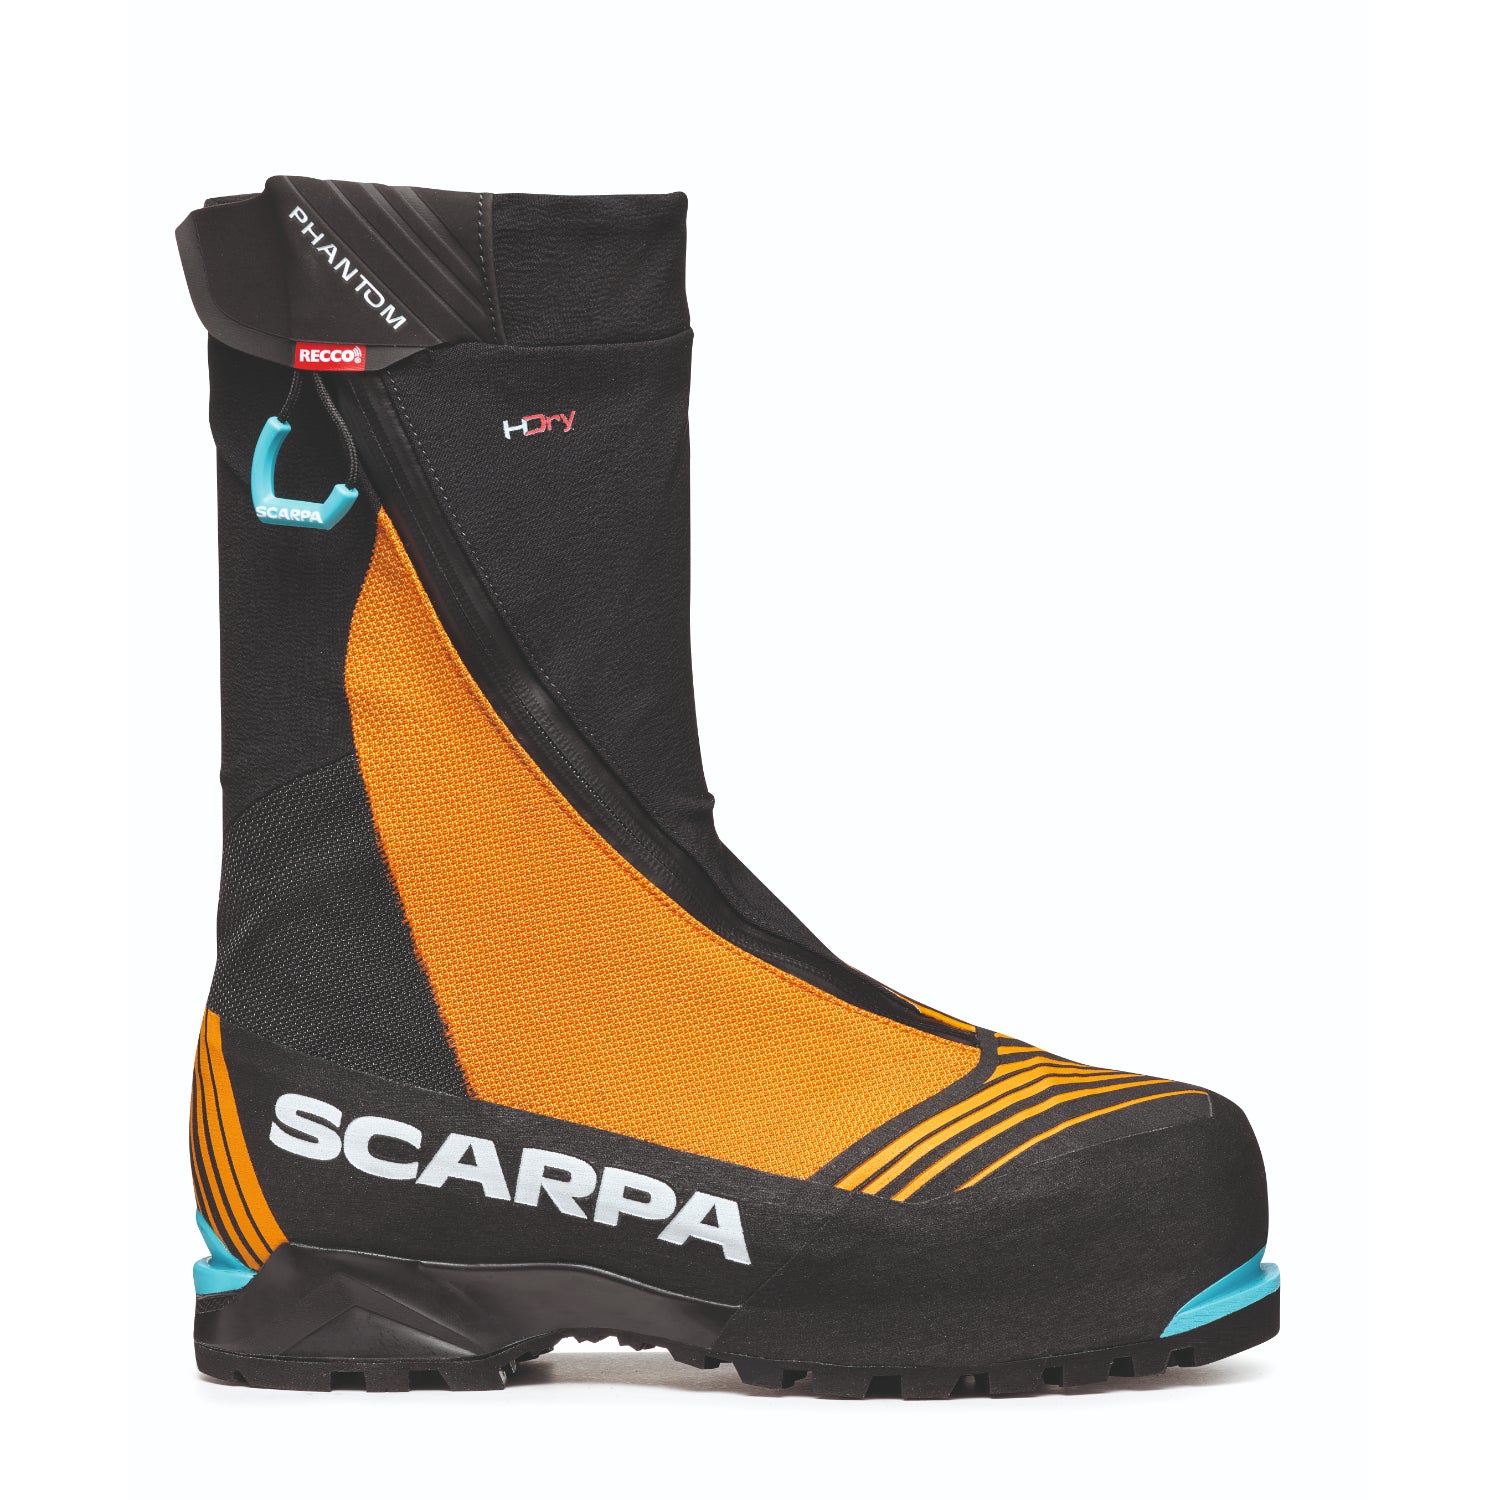 Scarpa Phantom 6000 HD mountaineering boot with Recco technology. Orange and black